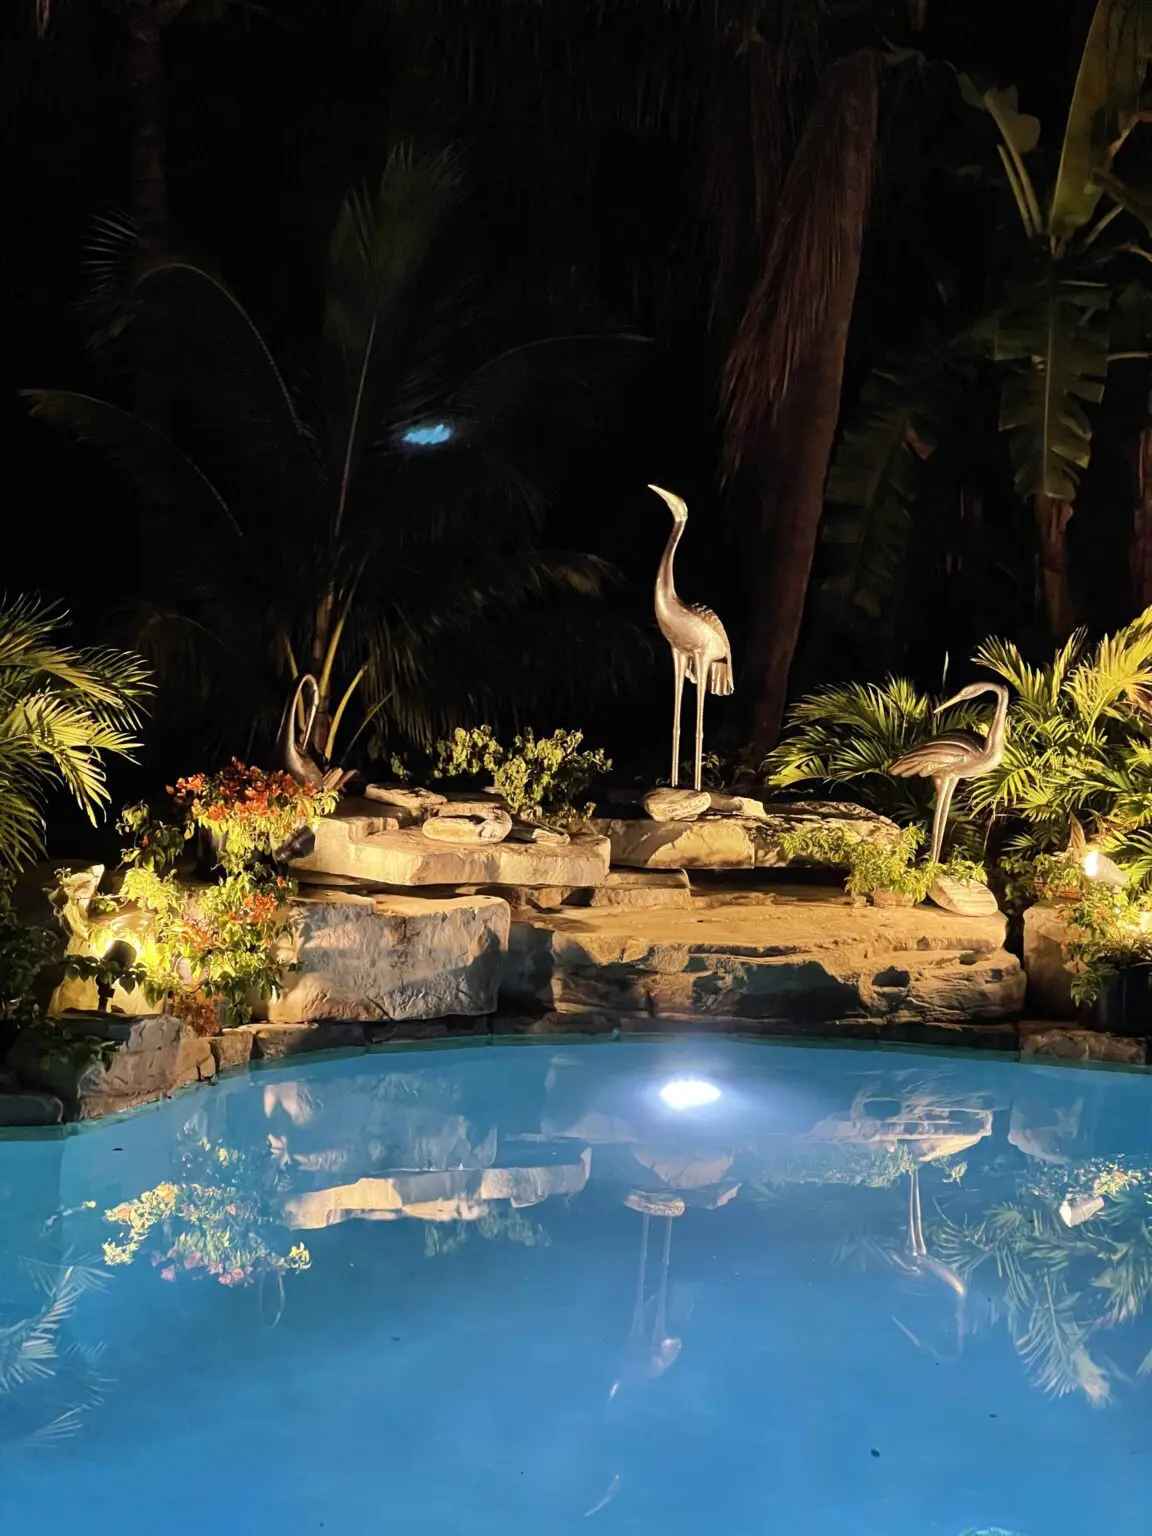 A beautiful swimming pool with bird statues